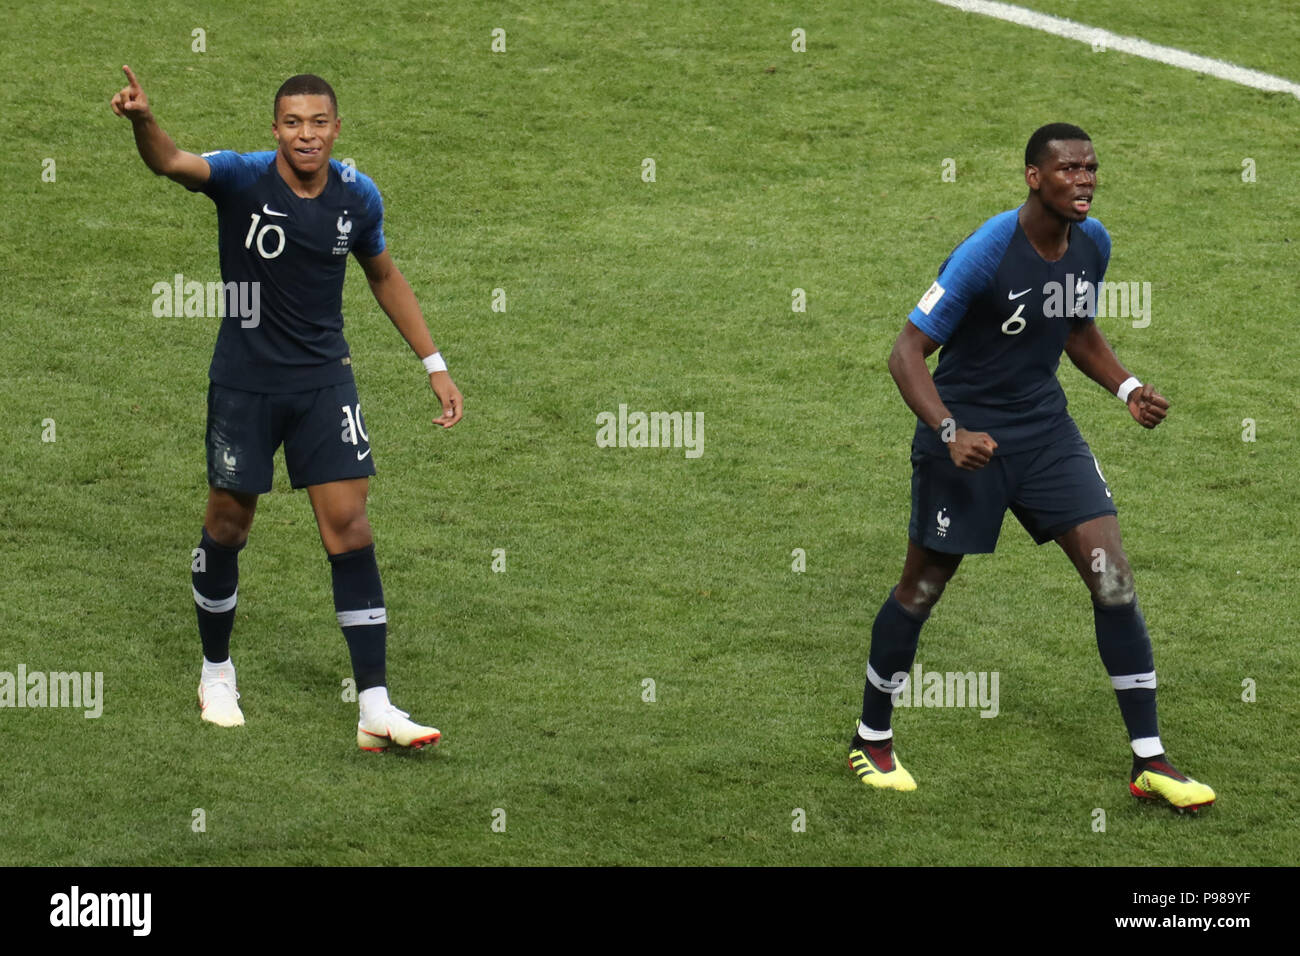 Kylian Mbappe and Paul Pogba FRANCE V CROATIA FRANCE V CROATIA, 2018 FIFA WORLD CUP FINAL 15 July 2018 GBC9737 2018 FIFA World Cup Russia, Final STRICTLY EDITORIAL USE ONLY